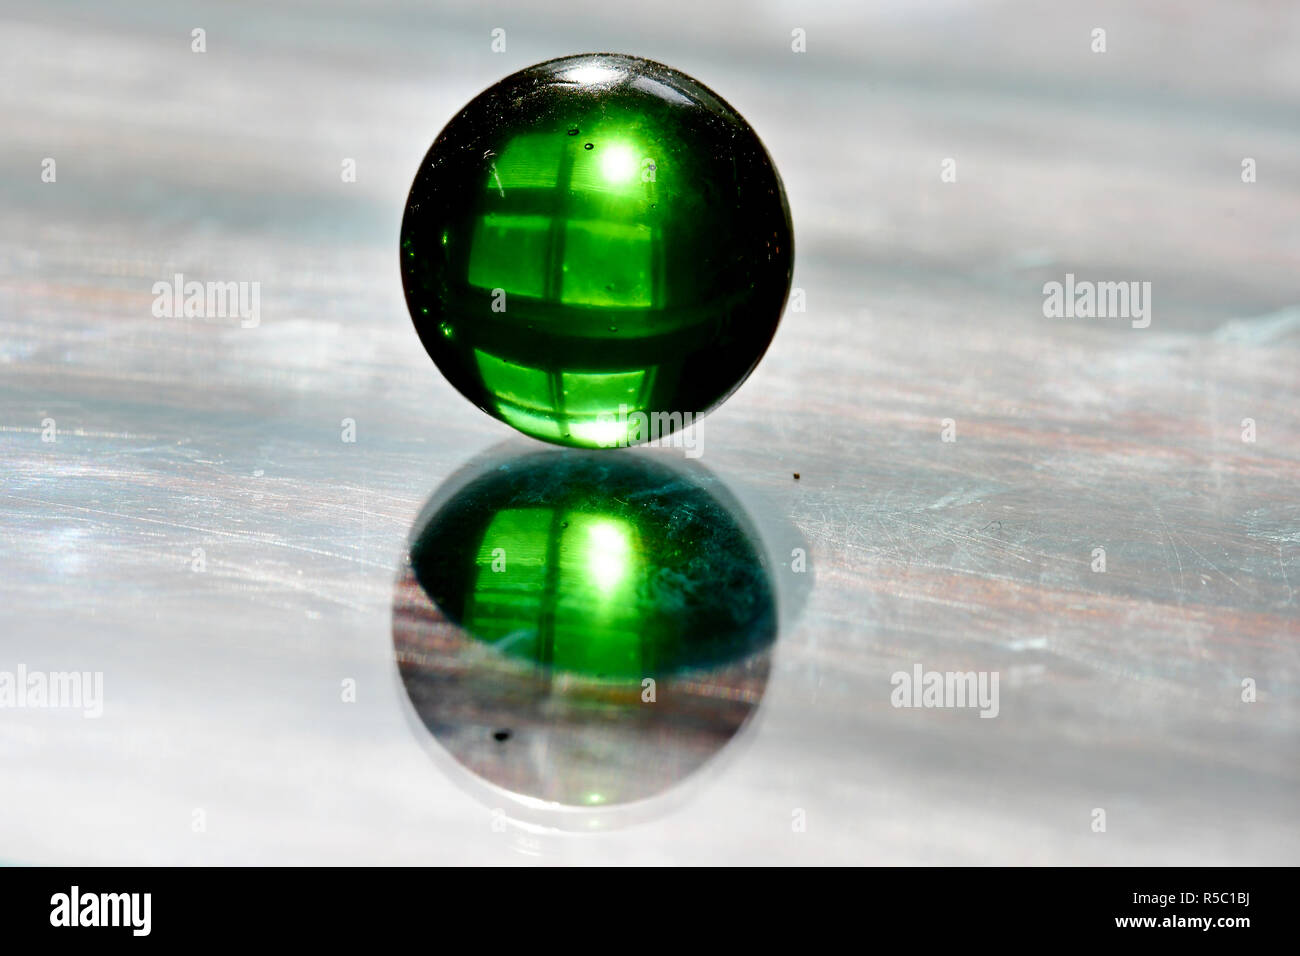 Marbles with light transparency and reflections Stock Photo